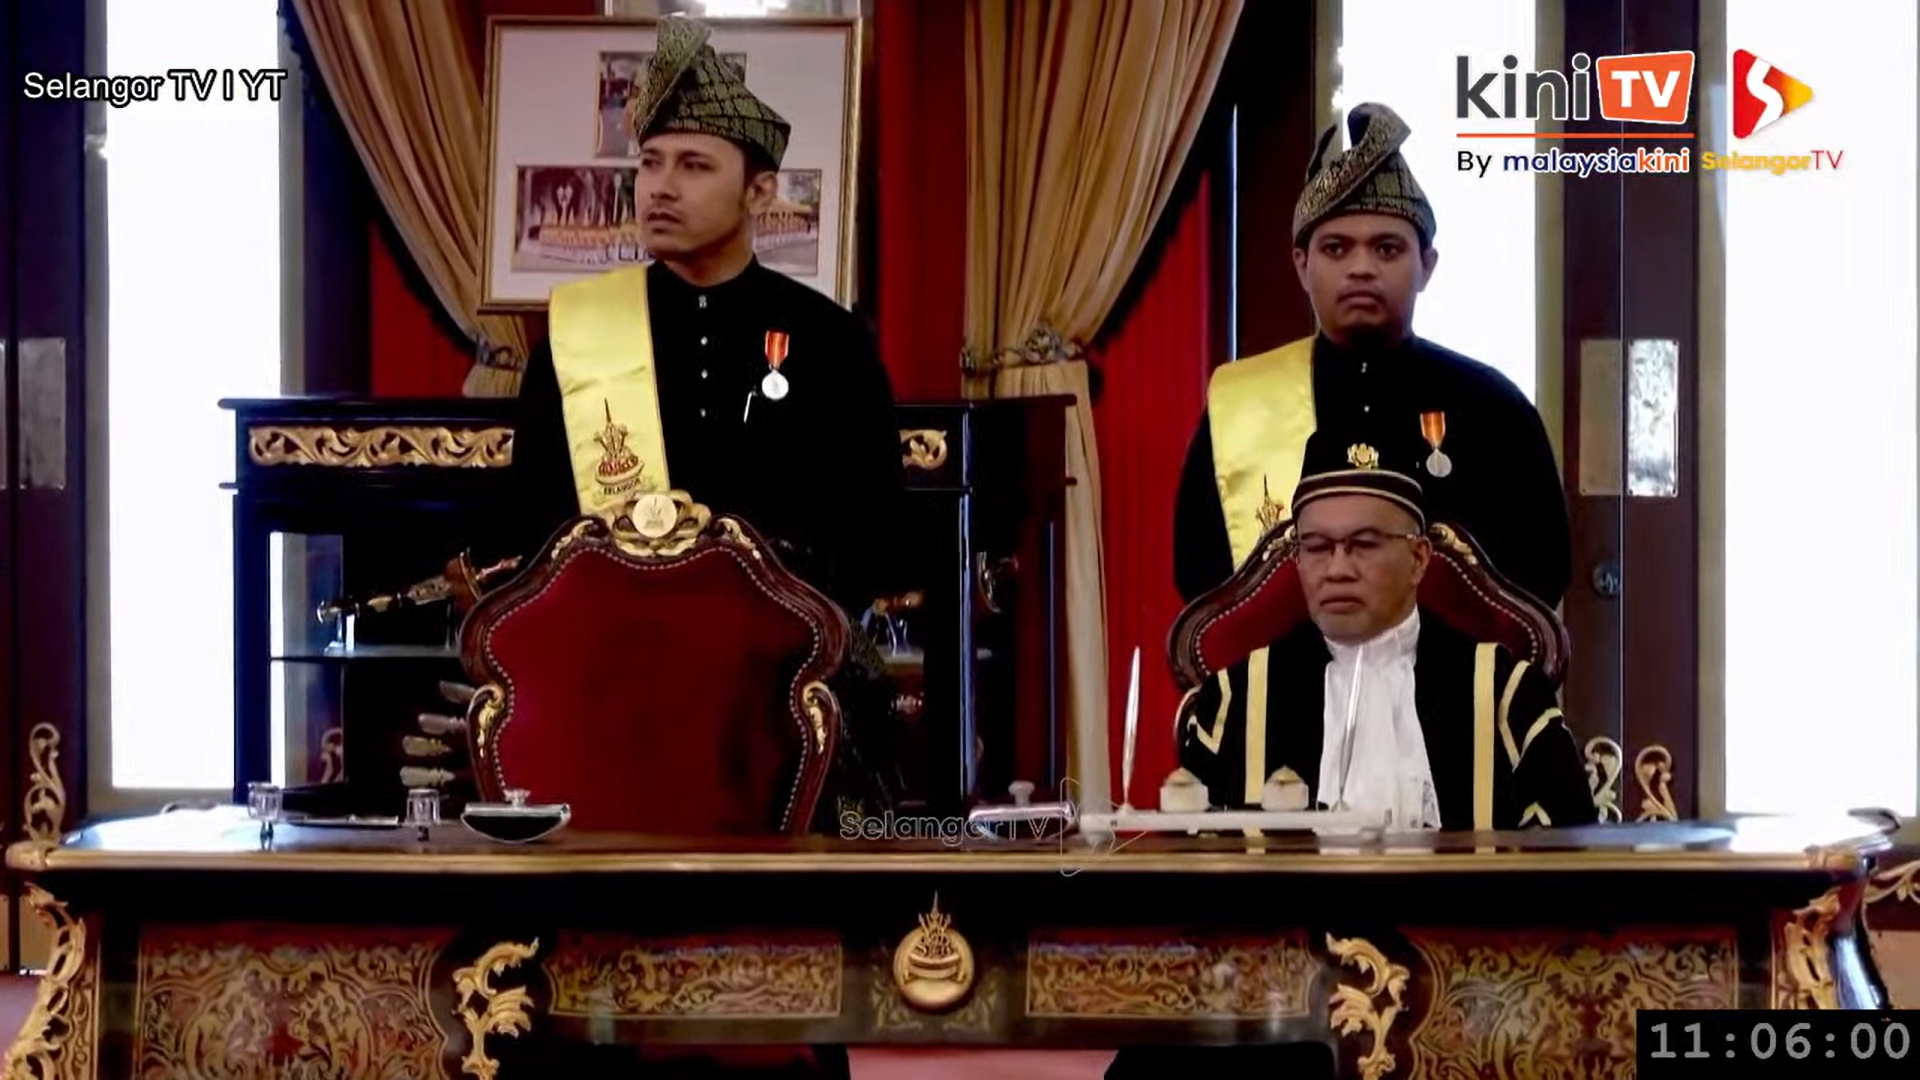 LIVE: Swearing-in ceremony for new Selangor MB